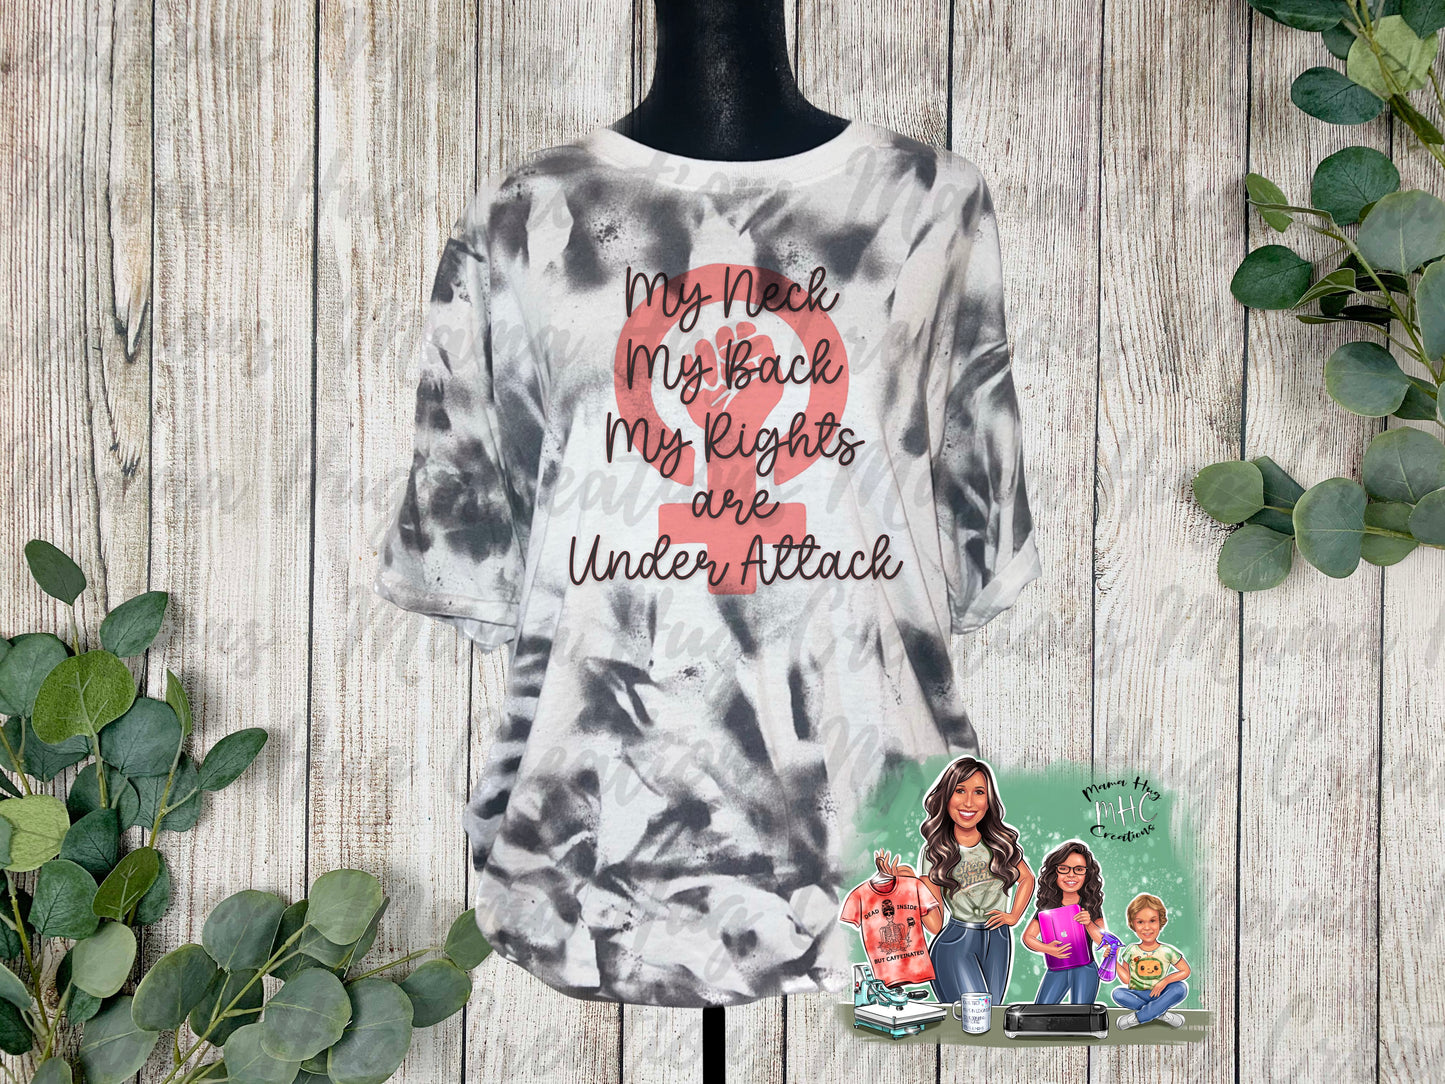 My Rights are under Attack T-Shirt